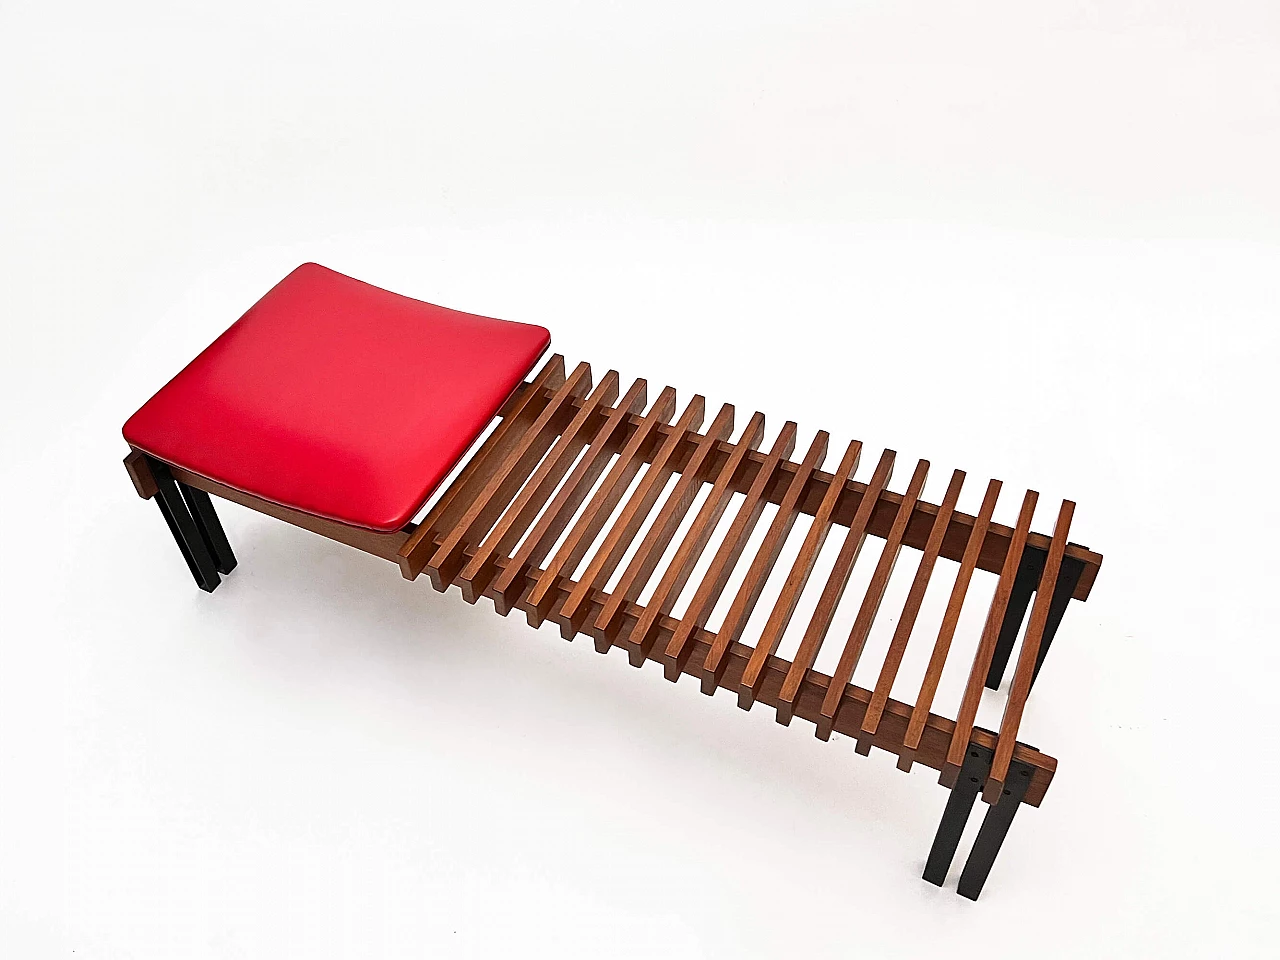 Teak and steel bench with skai seat by Inge and Luciano Rubino for APEC, 1960s 2